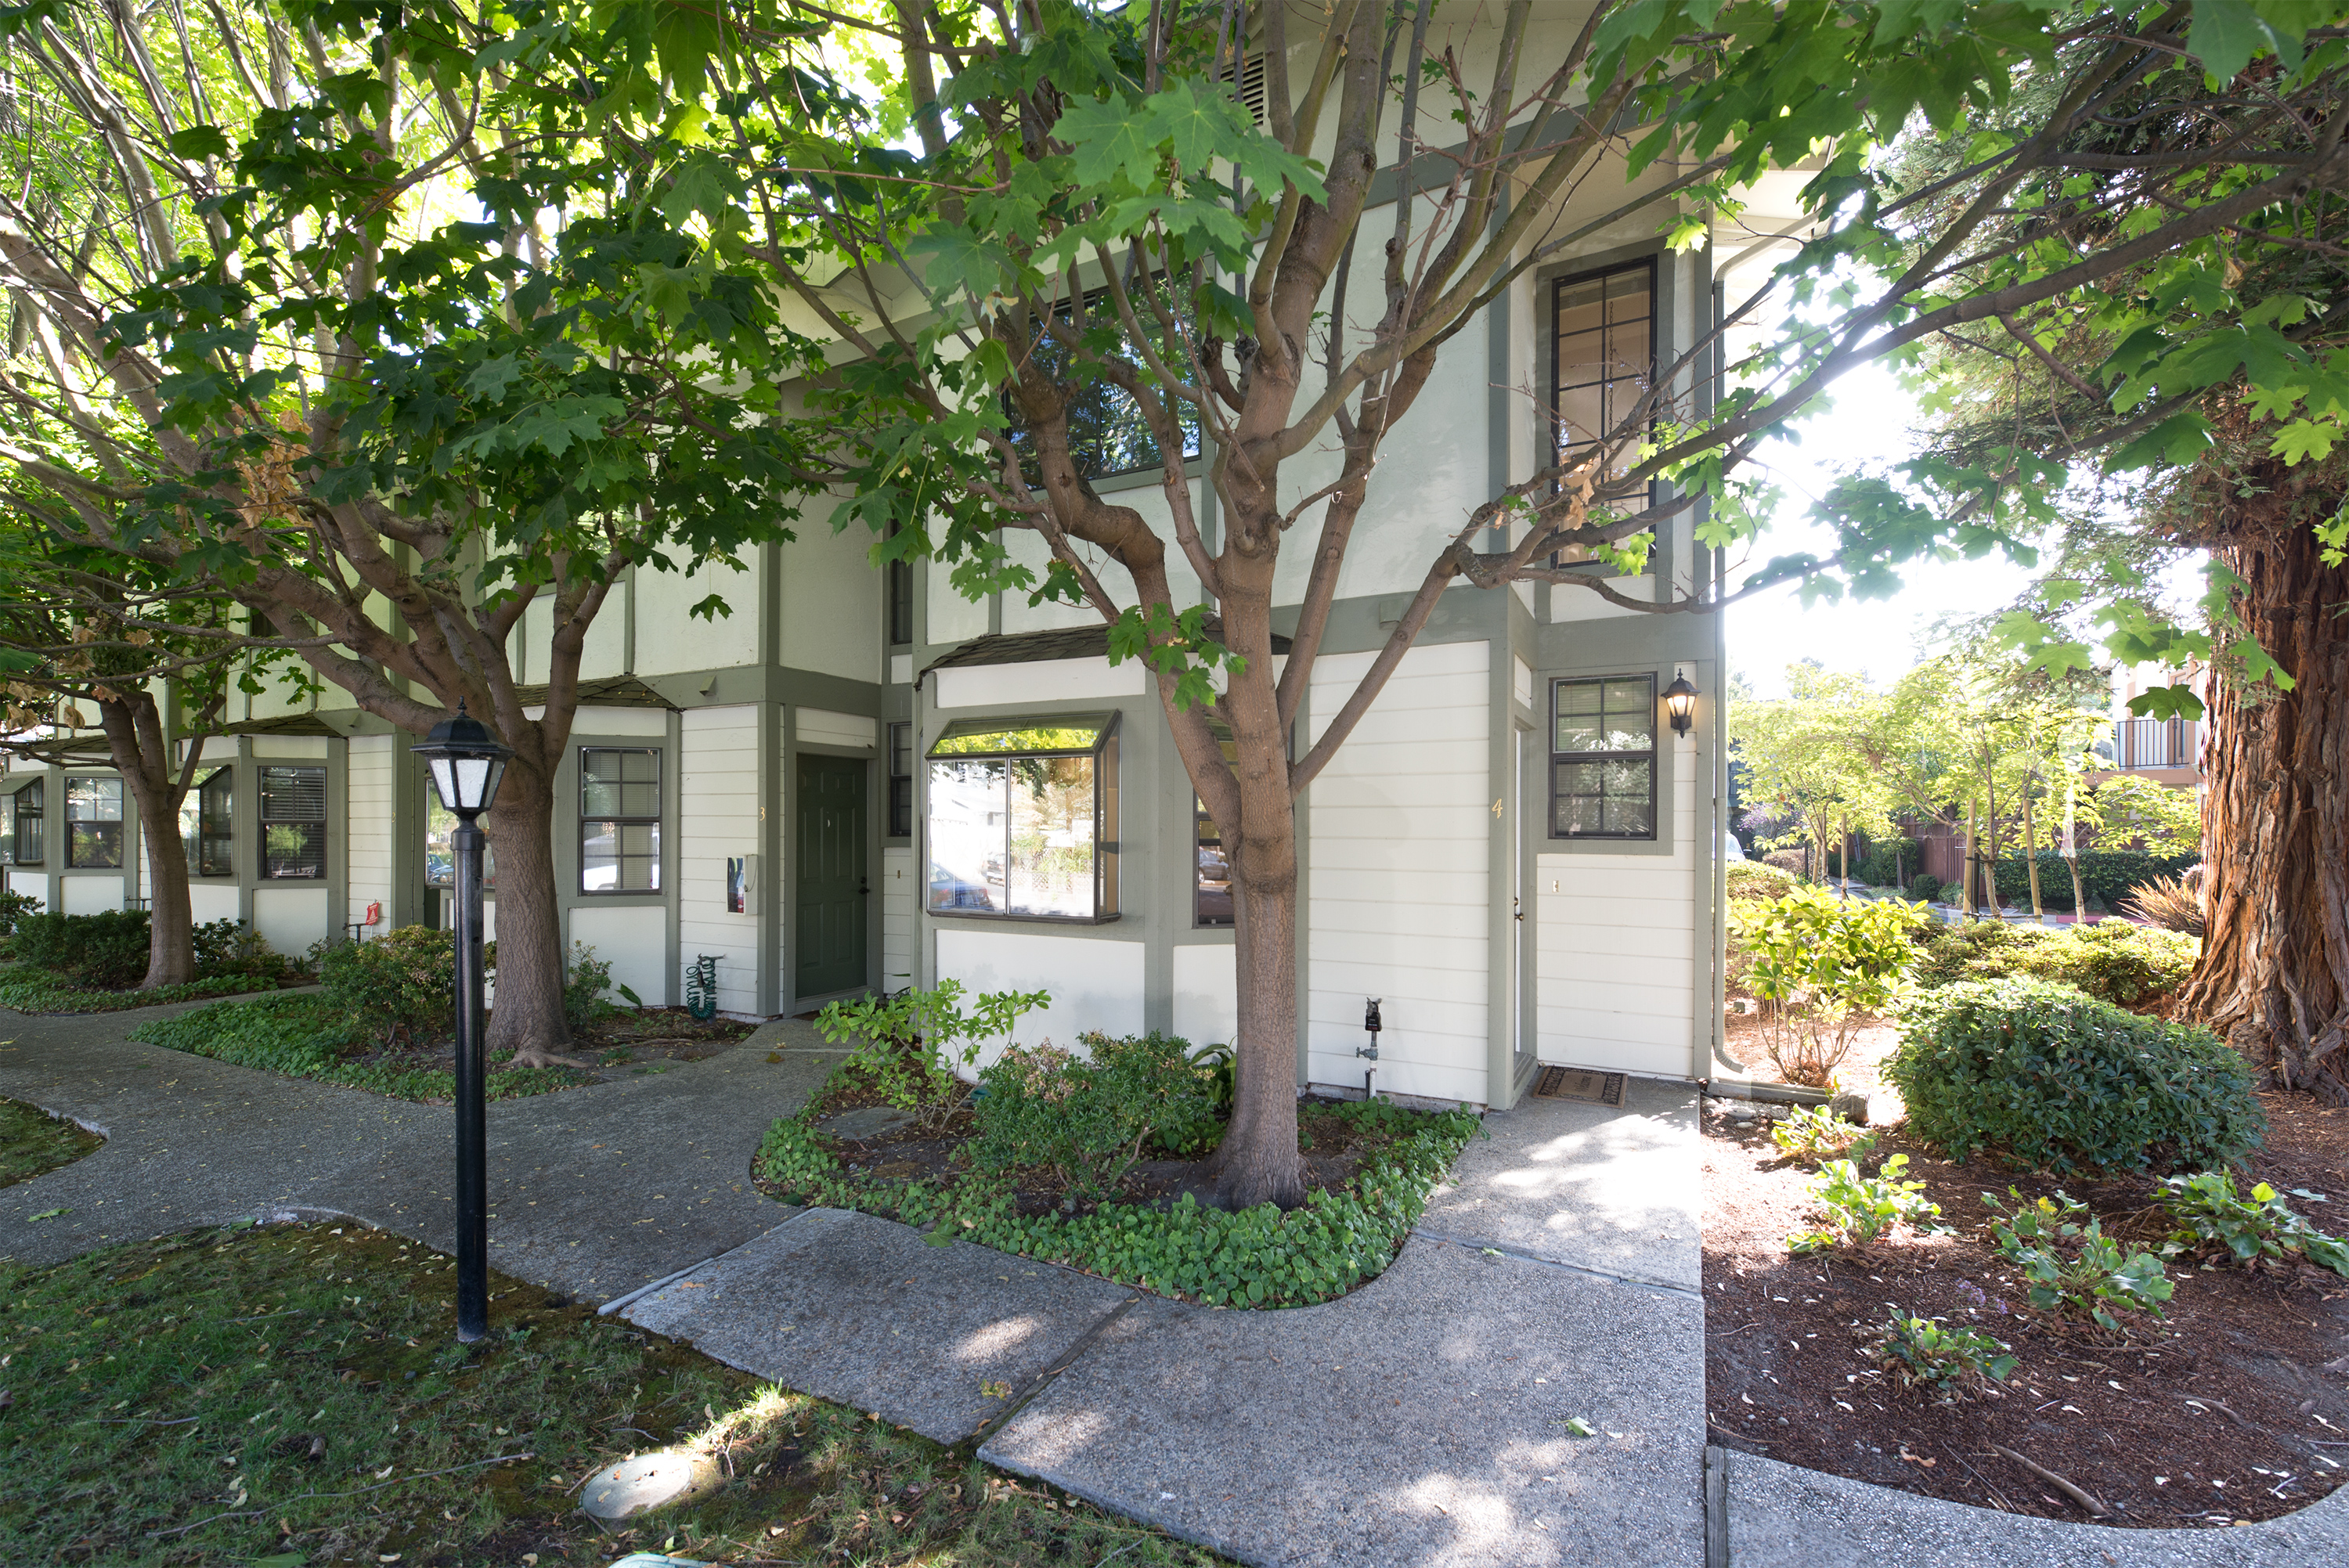 175 Evandale Ave #4, Mountain View 94043 - Evandale Ave 175 4 